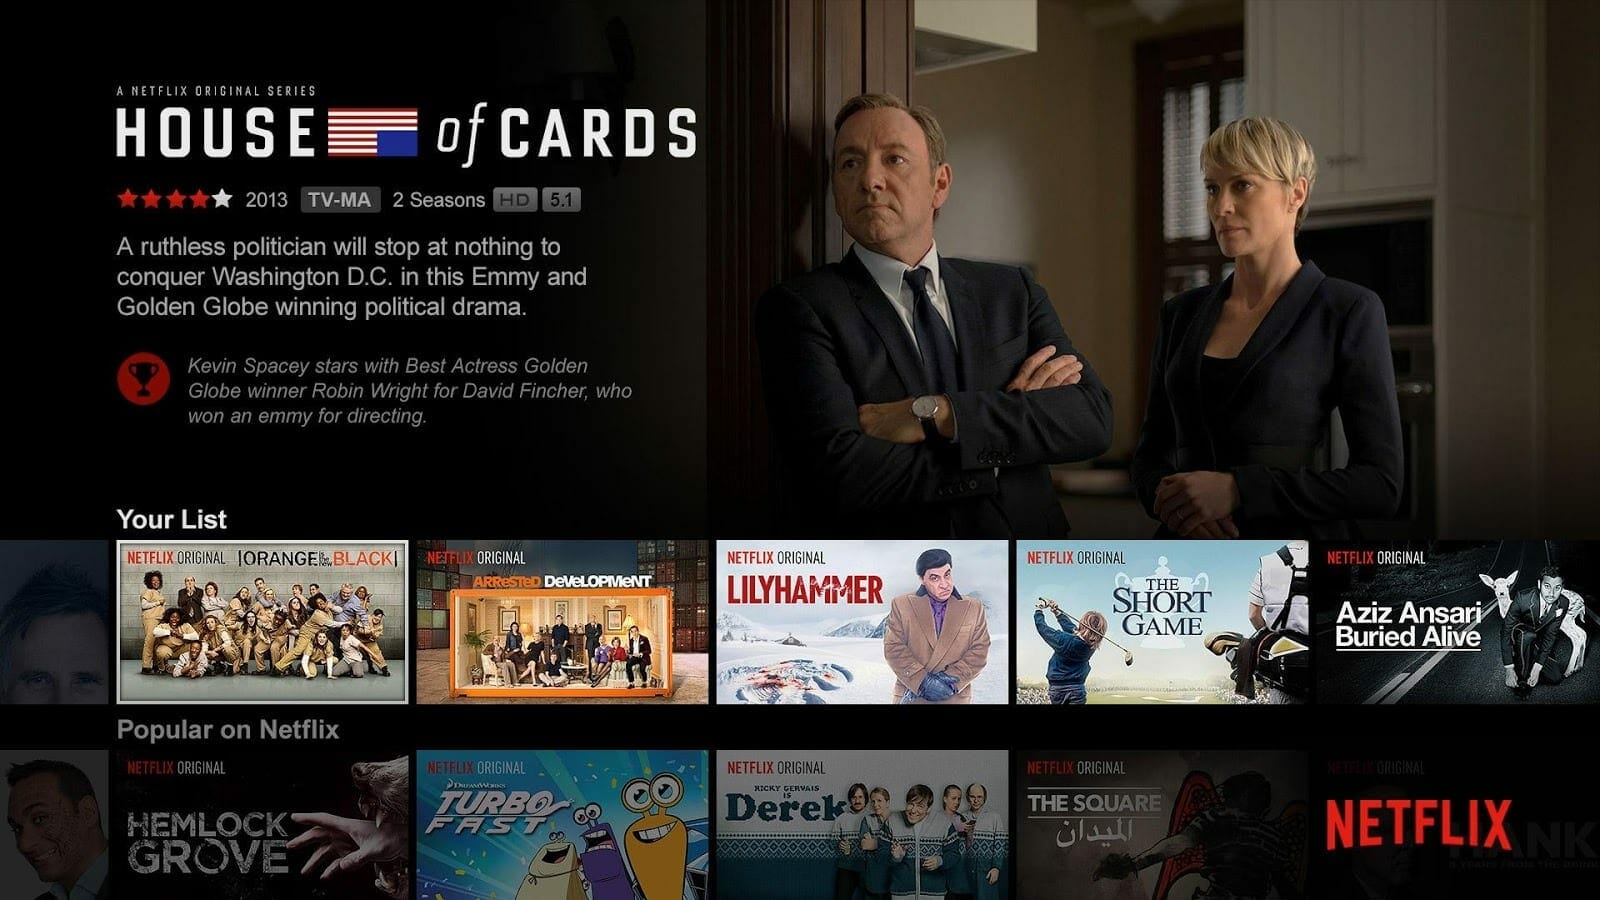 Netflix Apk Download For Android 5.1 1